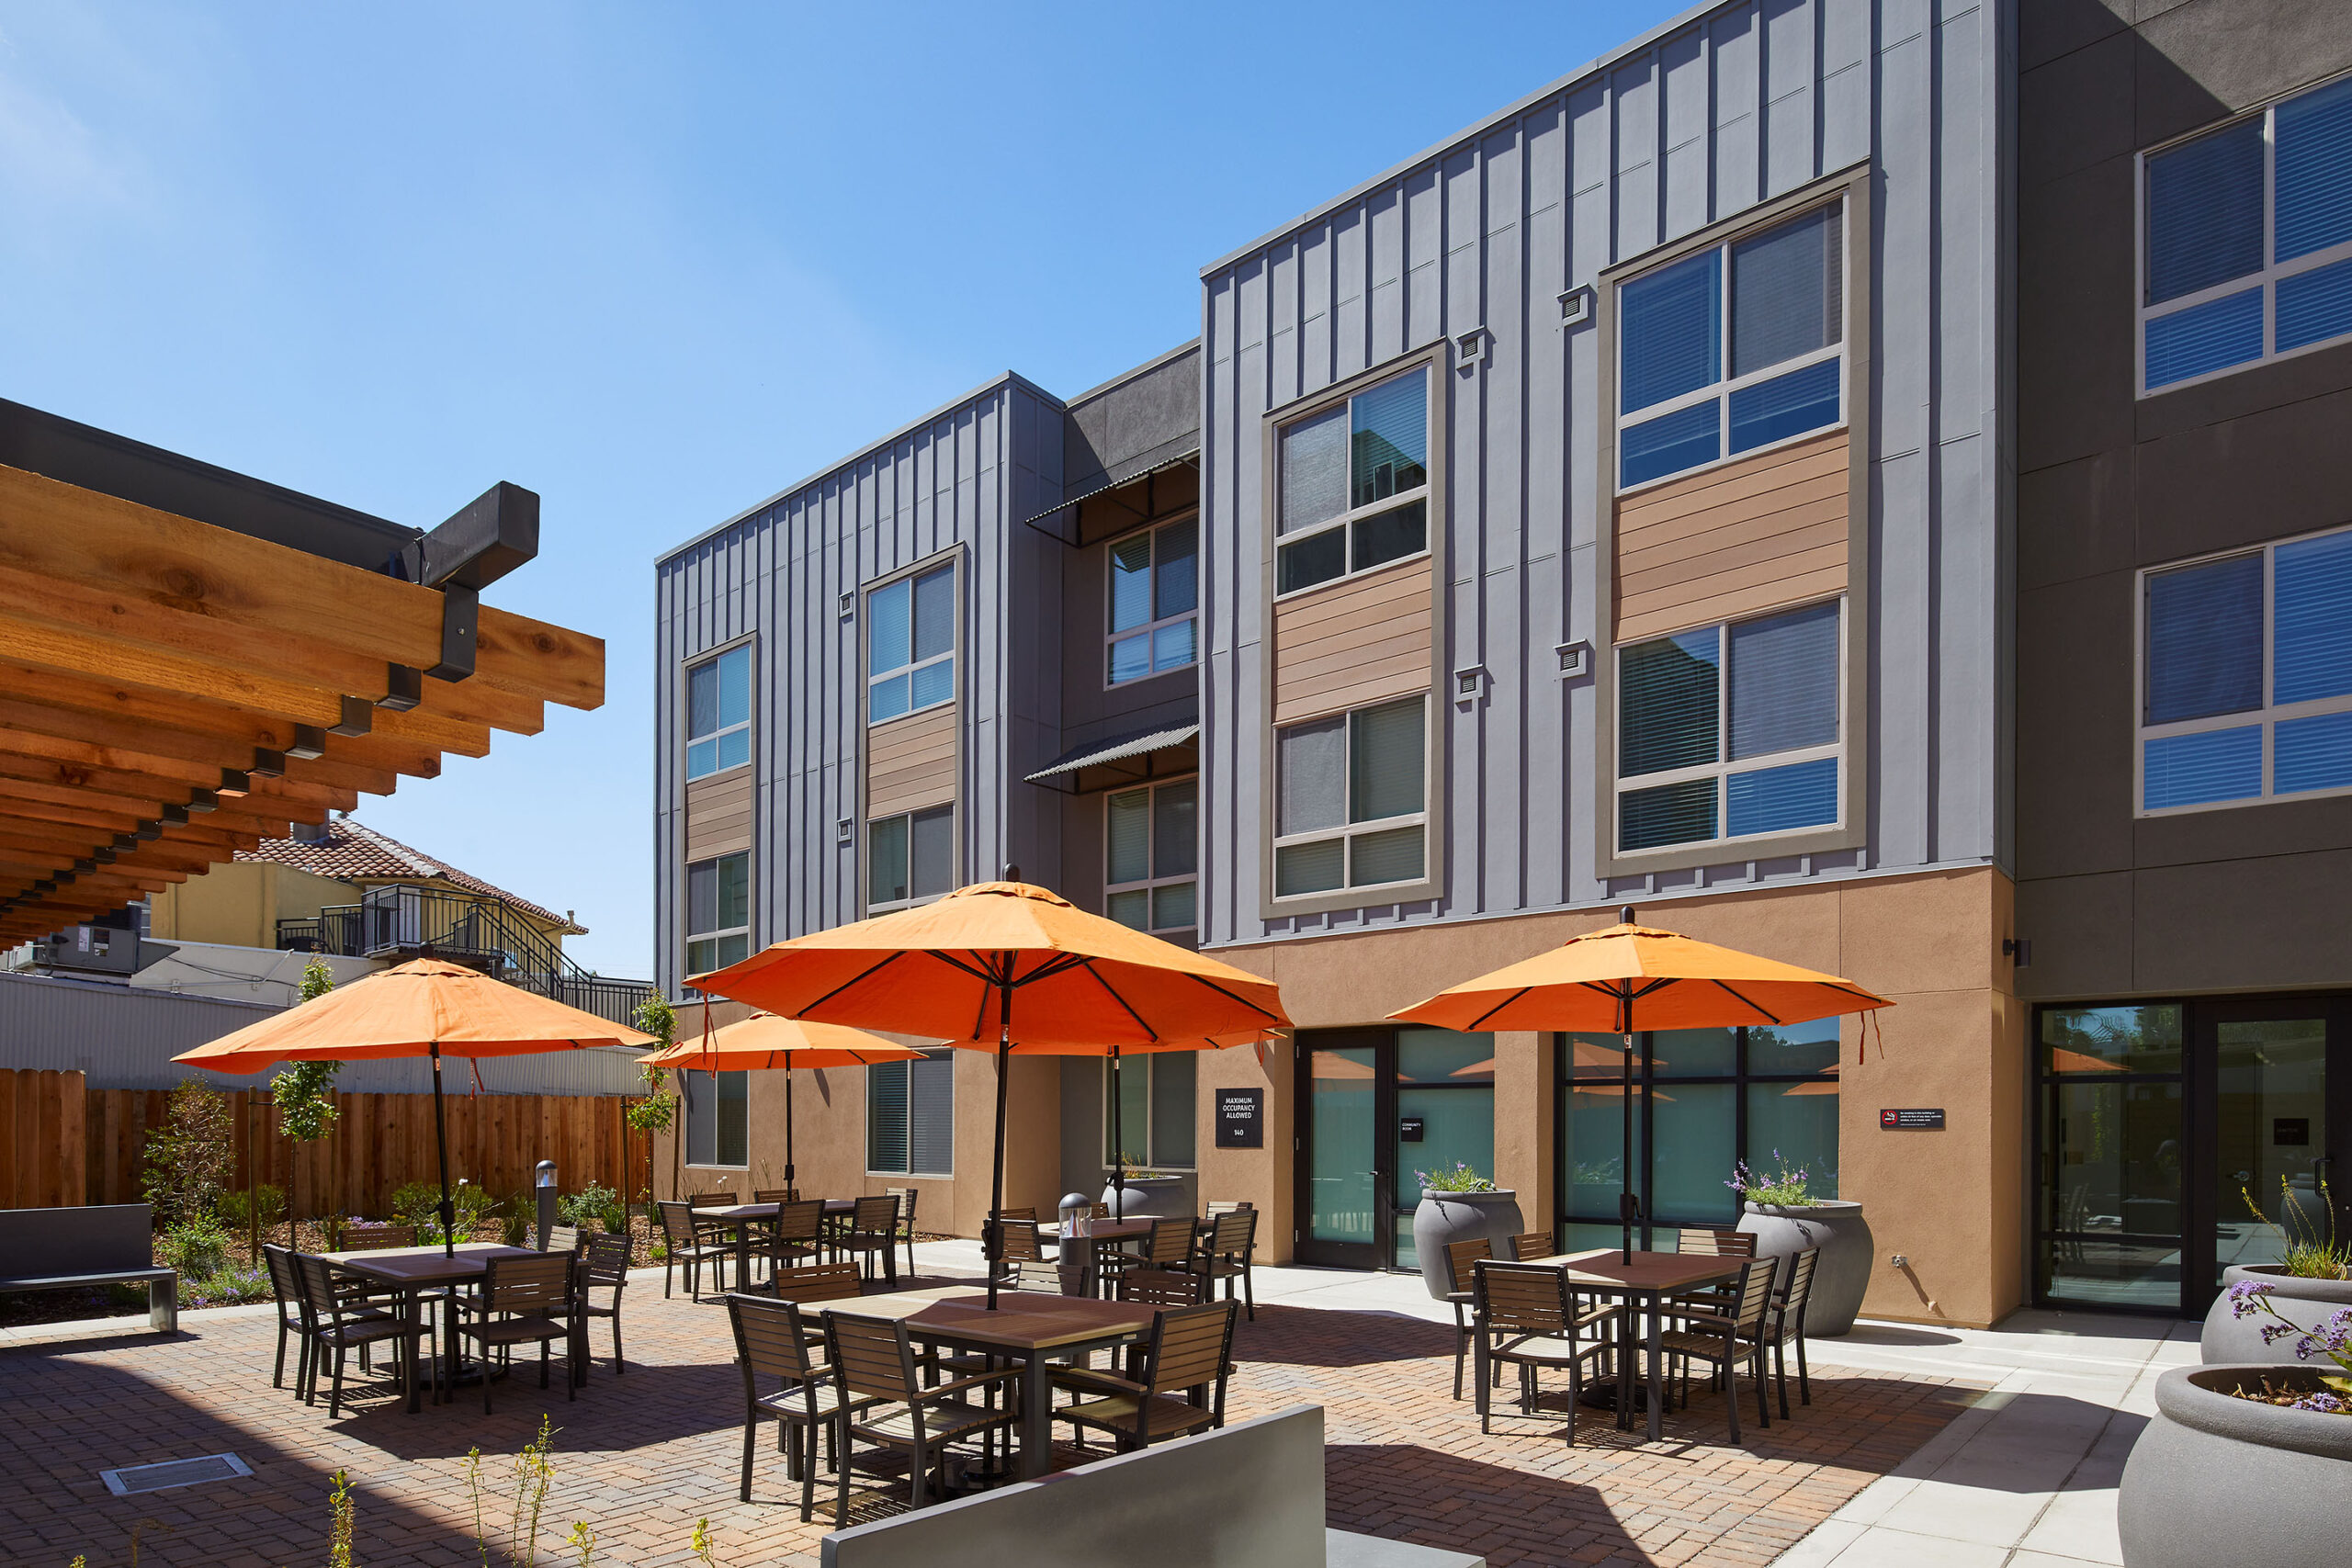 Photo of a sunny courtyard at the Veterans Square development. Orange umbrellas cover dining tables in front of the building.